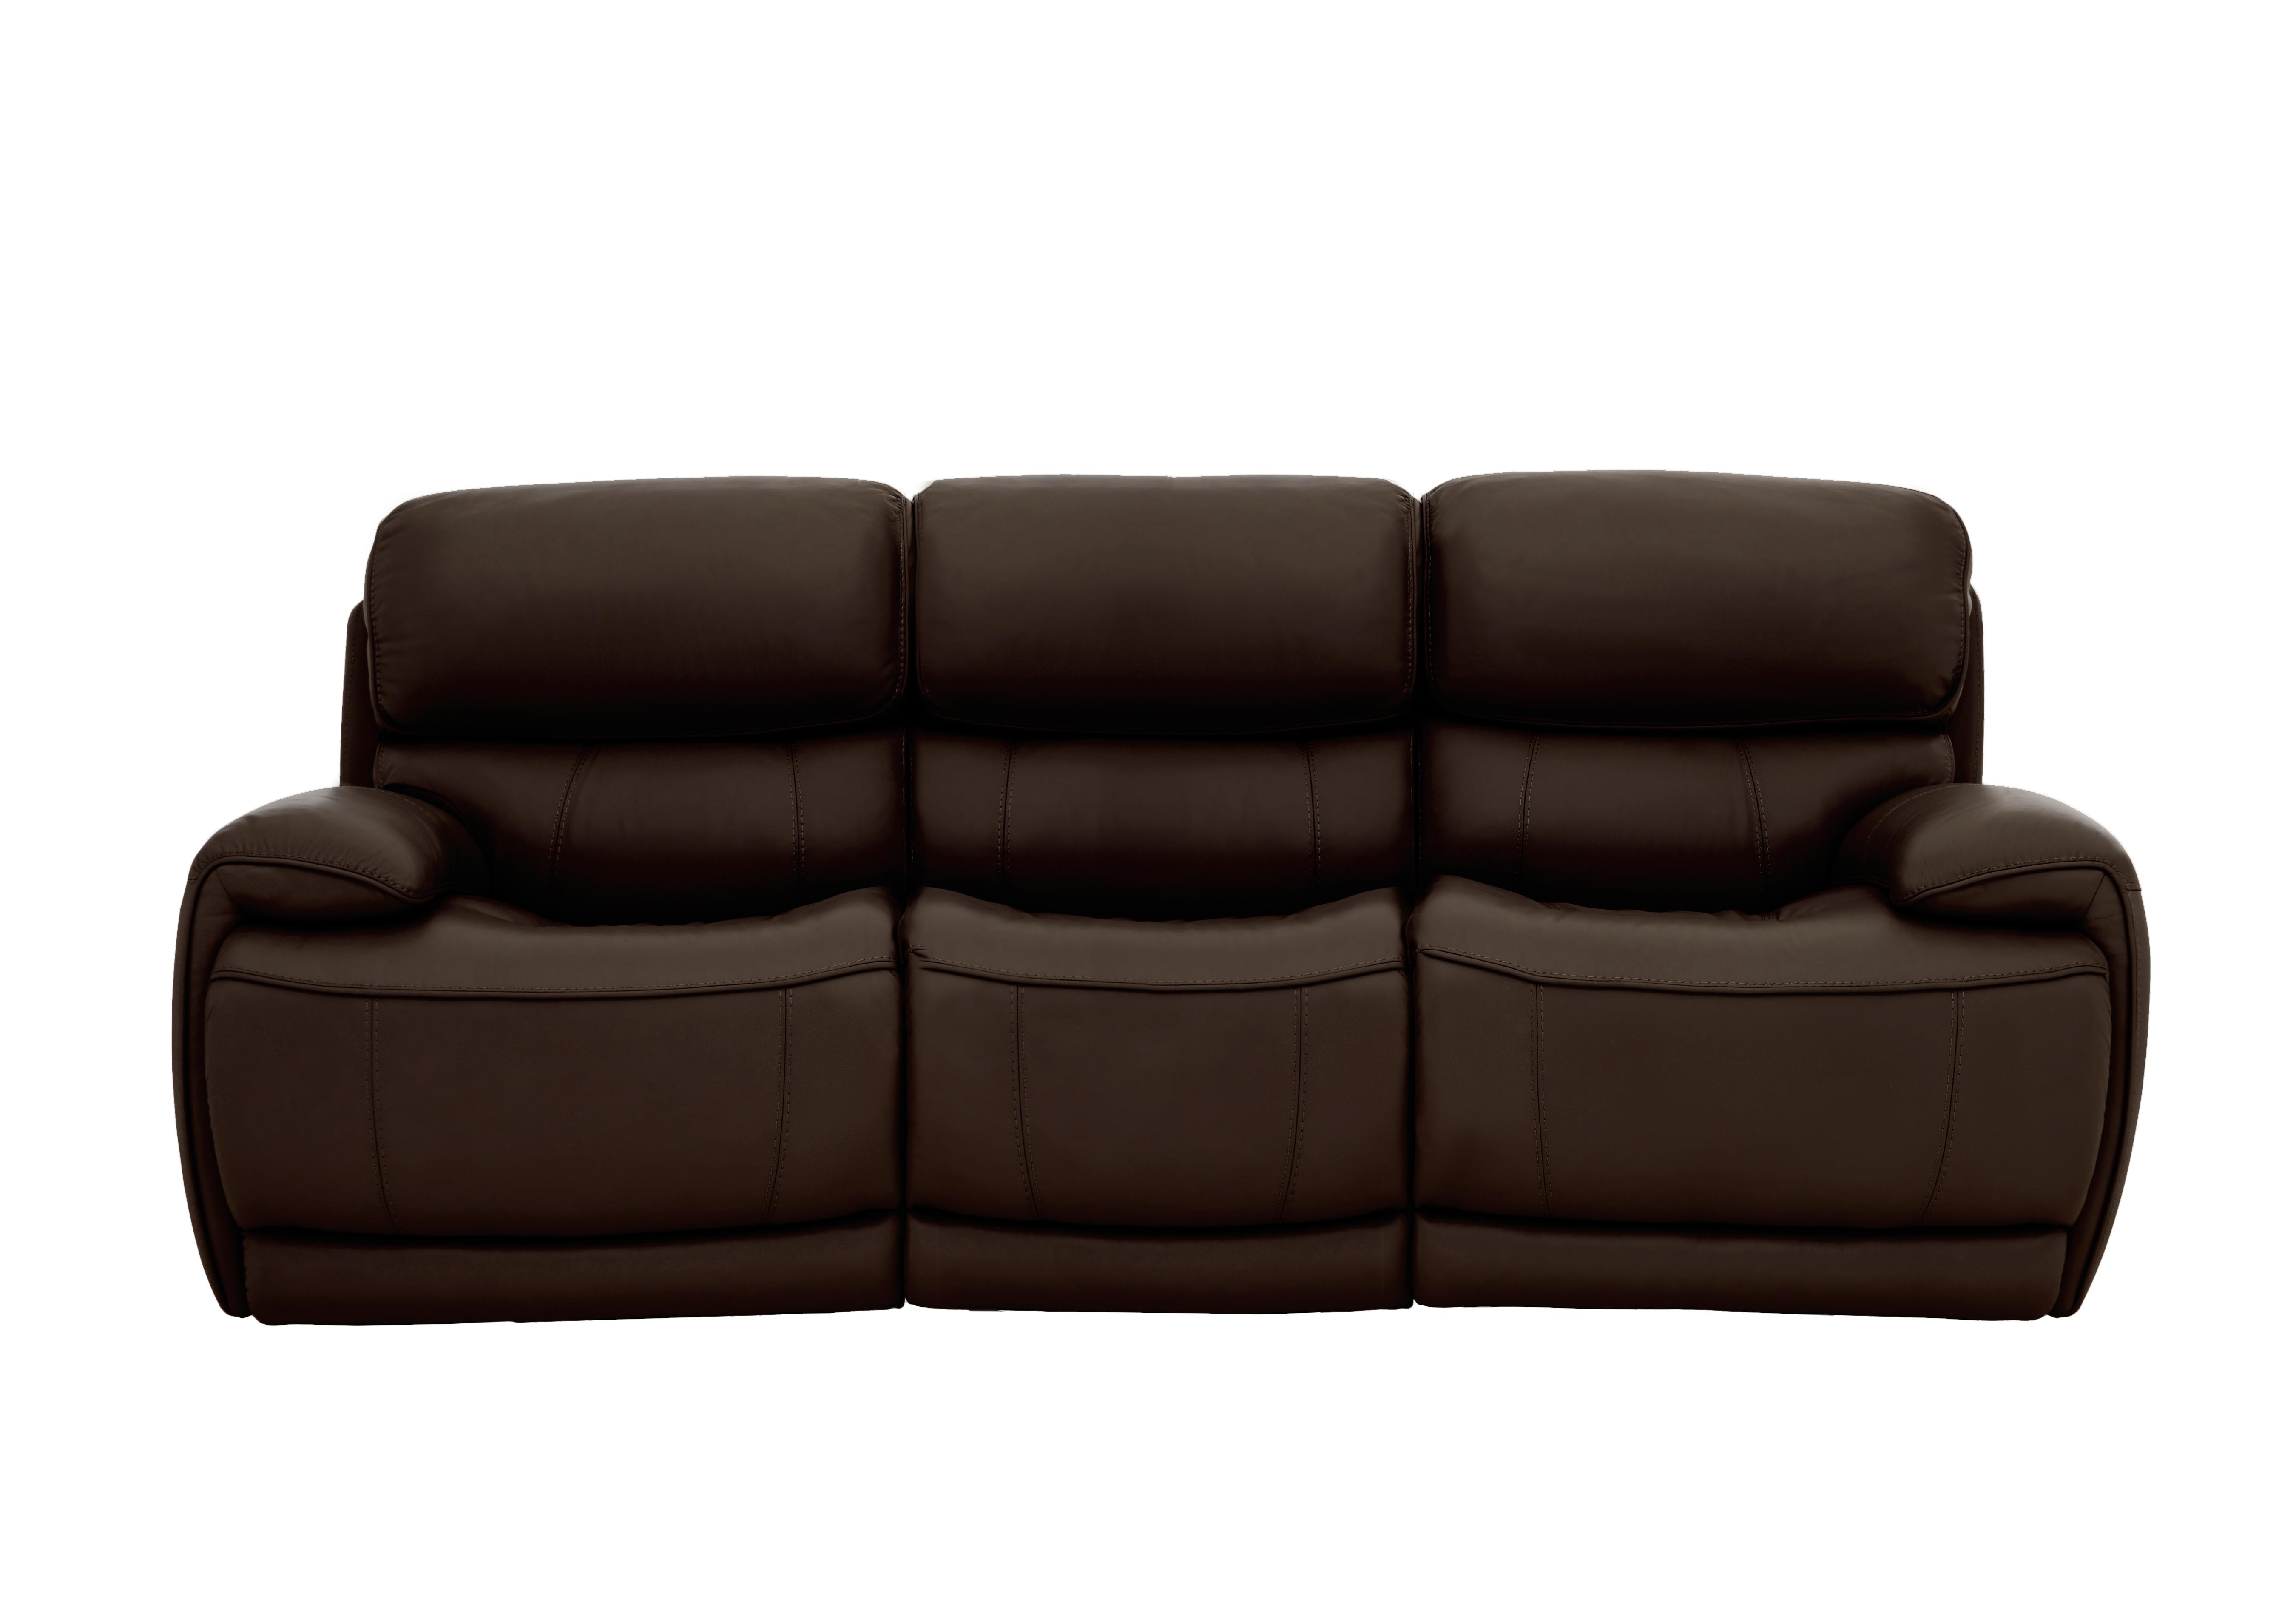 Rocco 3 Seater Leather Power Rocker Sofa with Power Headrests in Bv-1748 Dark Chocolate on Furniture Village